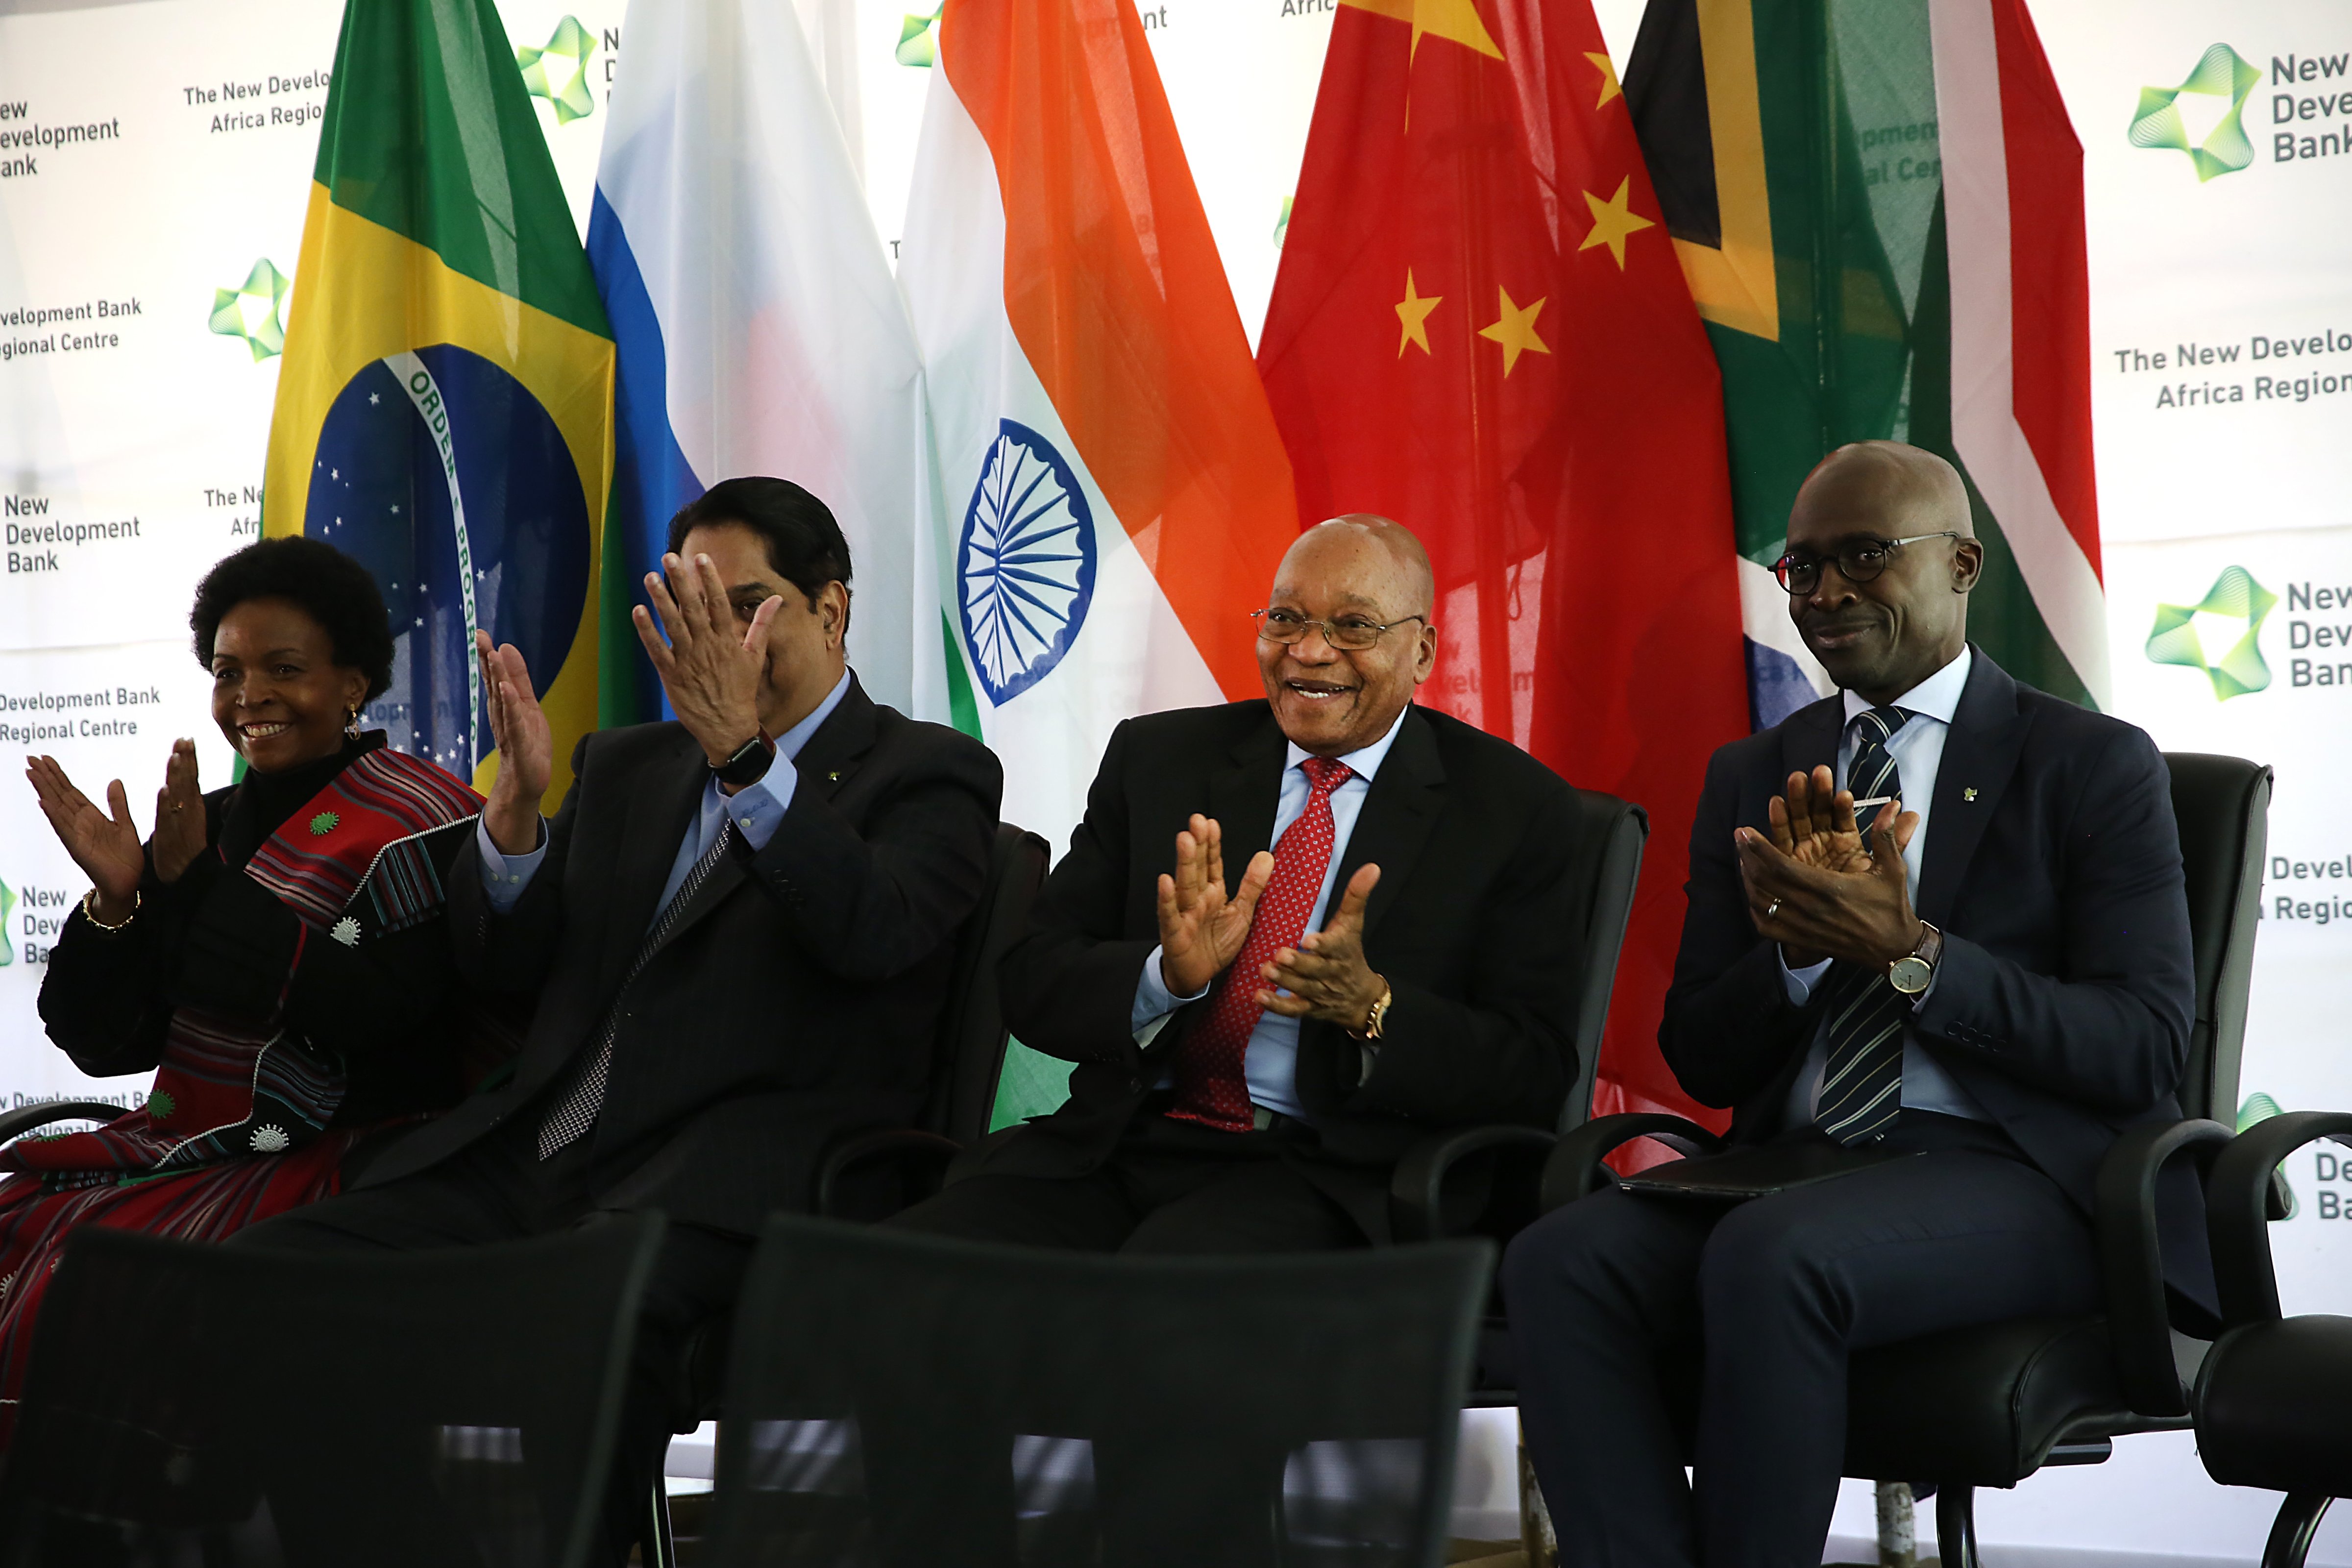 The president of the Brics New Development Bank, KV Kamath, is seen with President Jacob Zuma, Malusi Gigaba and Maite Nkoana-Mashabane during the launch of the bank at the African Regional Centre on August 17, 2017 in Sandton, South Africa (The Times—Getty Images)